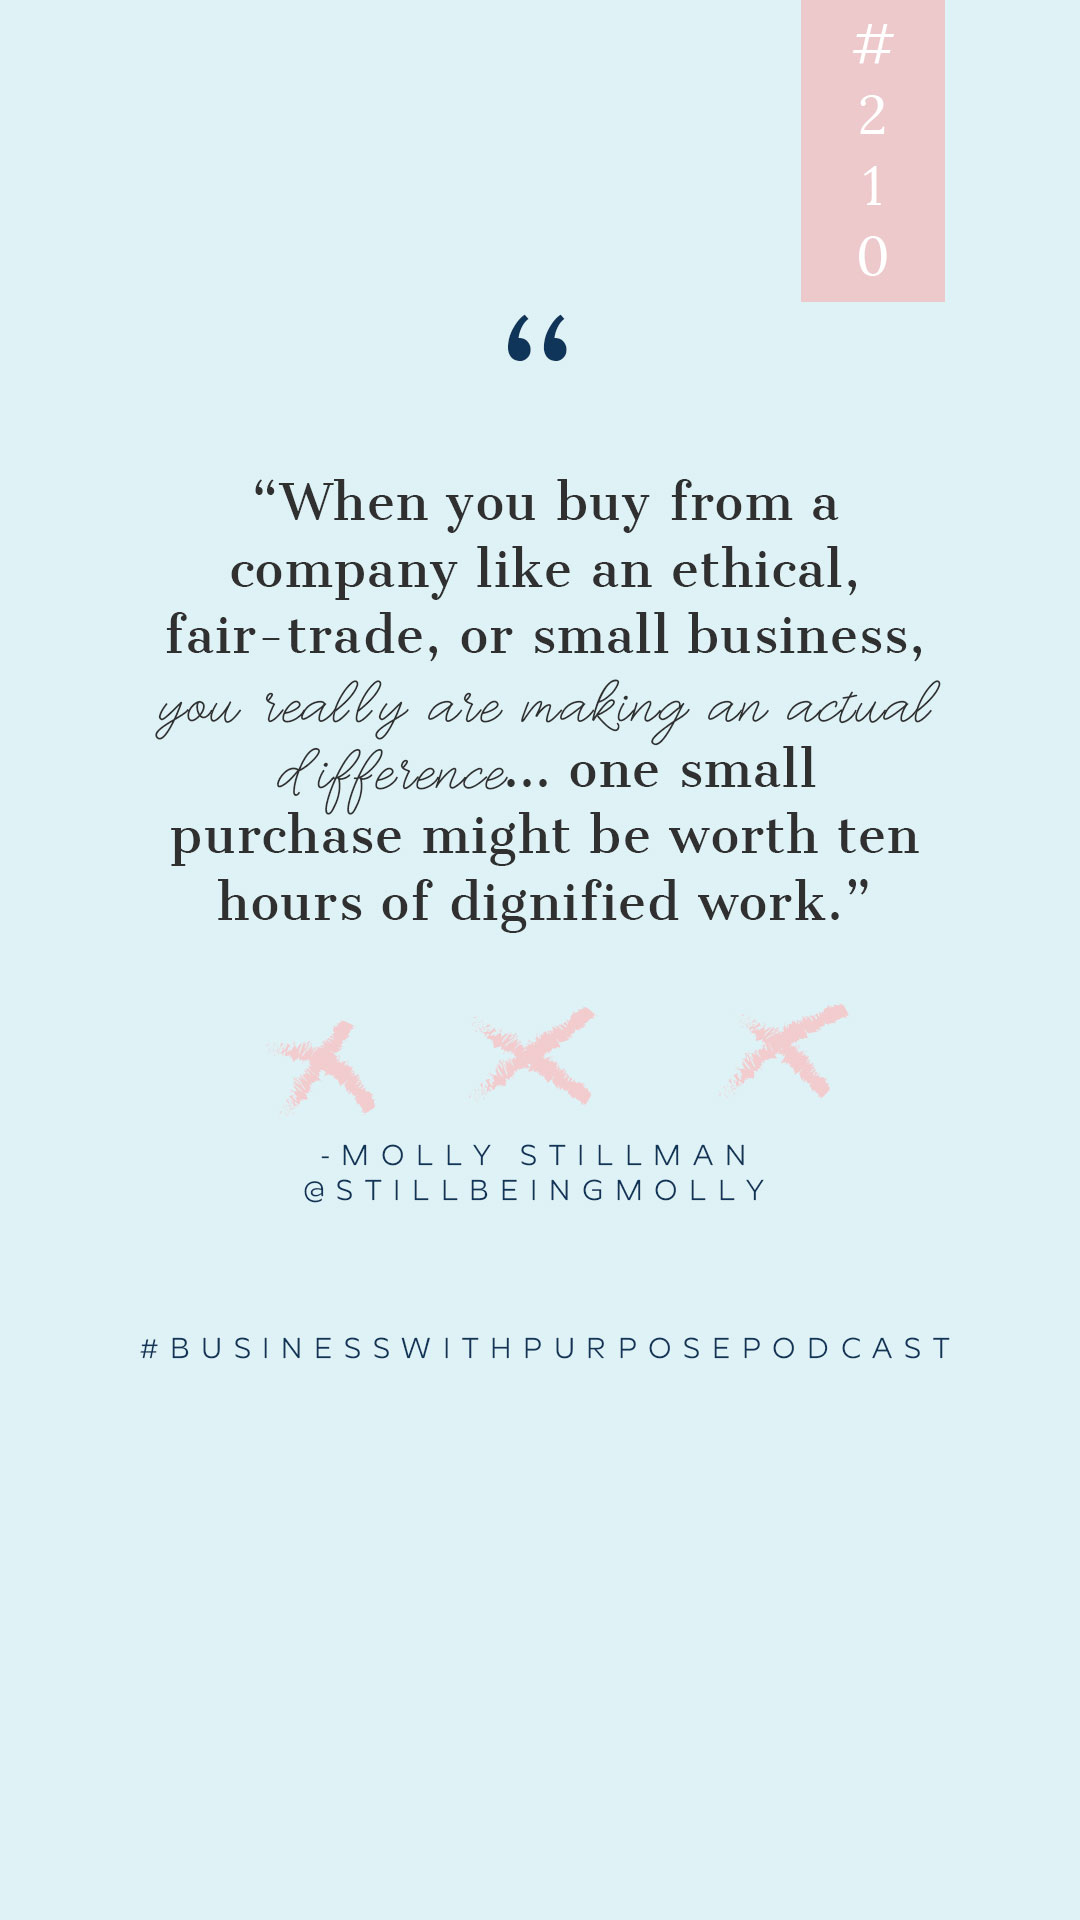 How to Get Started Shopping Ethically | Business with Purpose Podcast EP 210